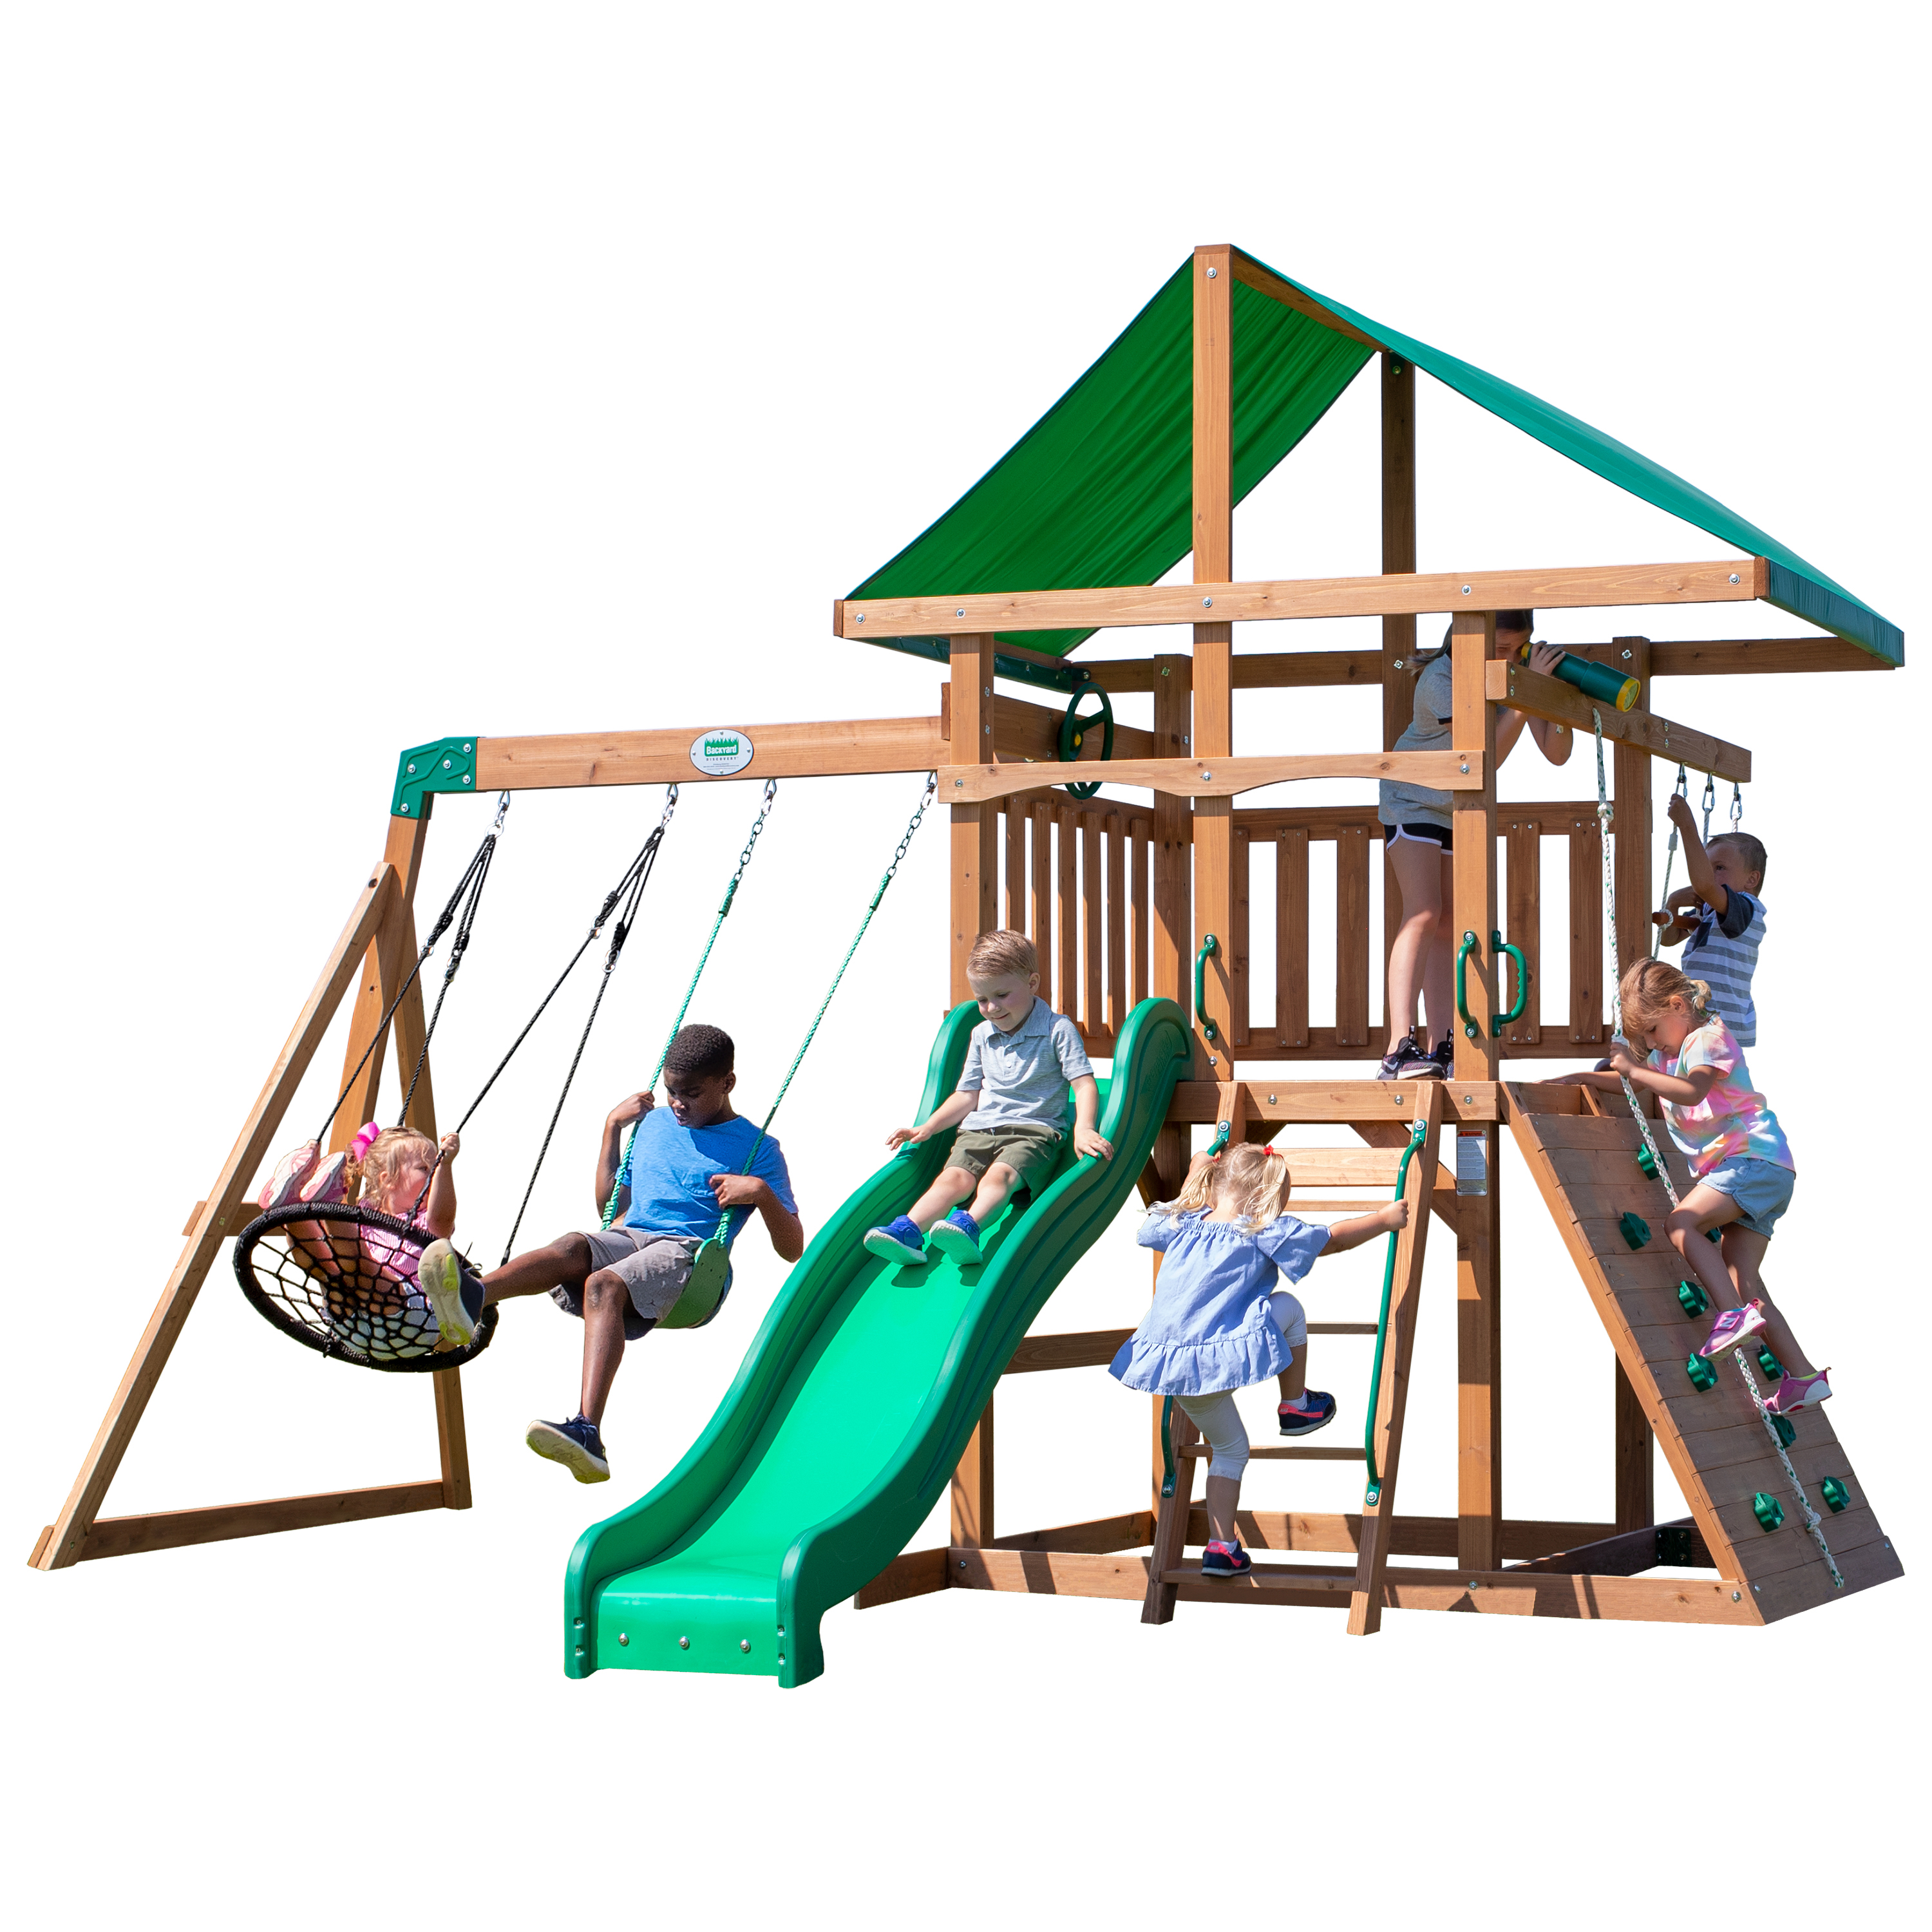 Greyson Peak Swing Set with Slide and Climbing Wall